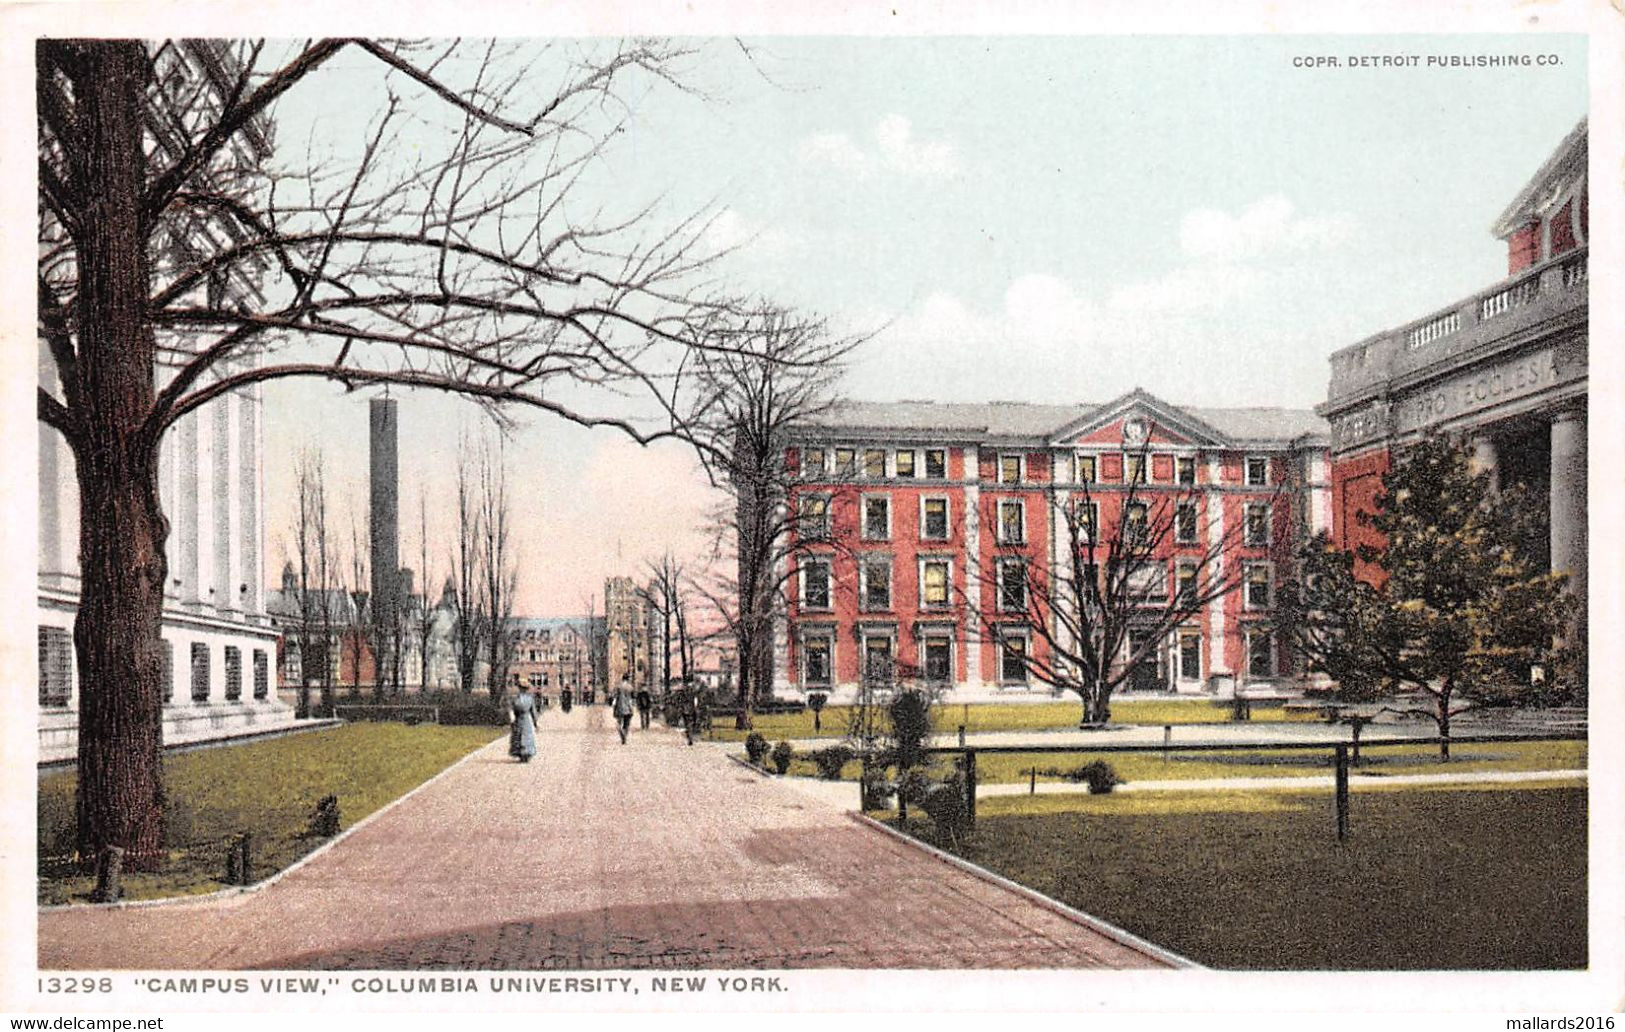 NEW YORK - COLUMBIA UNIVERSITY - CAMPUS VIEW ~ AN OLD POSTCARD #2231104 - Education, Schools And Universities